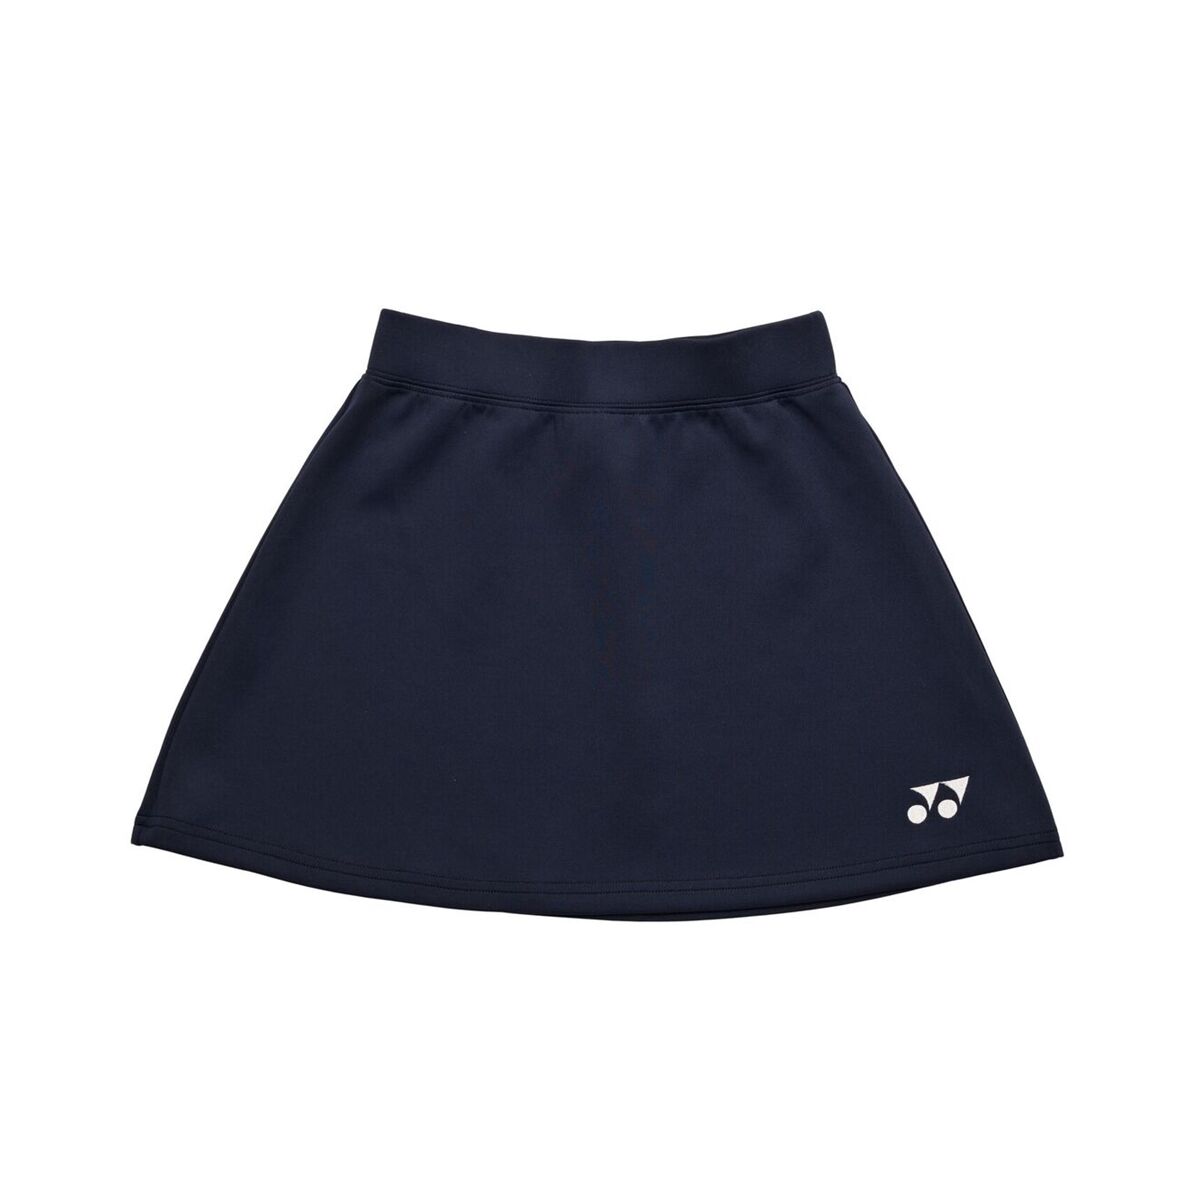 Yonex Womens Skirt Navy (with underpants) XL